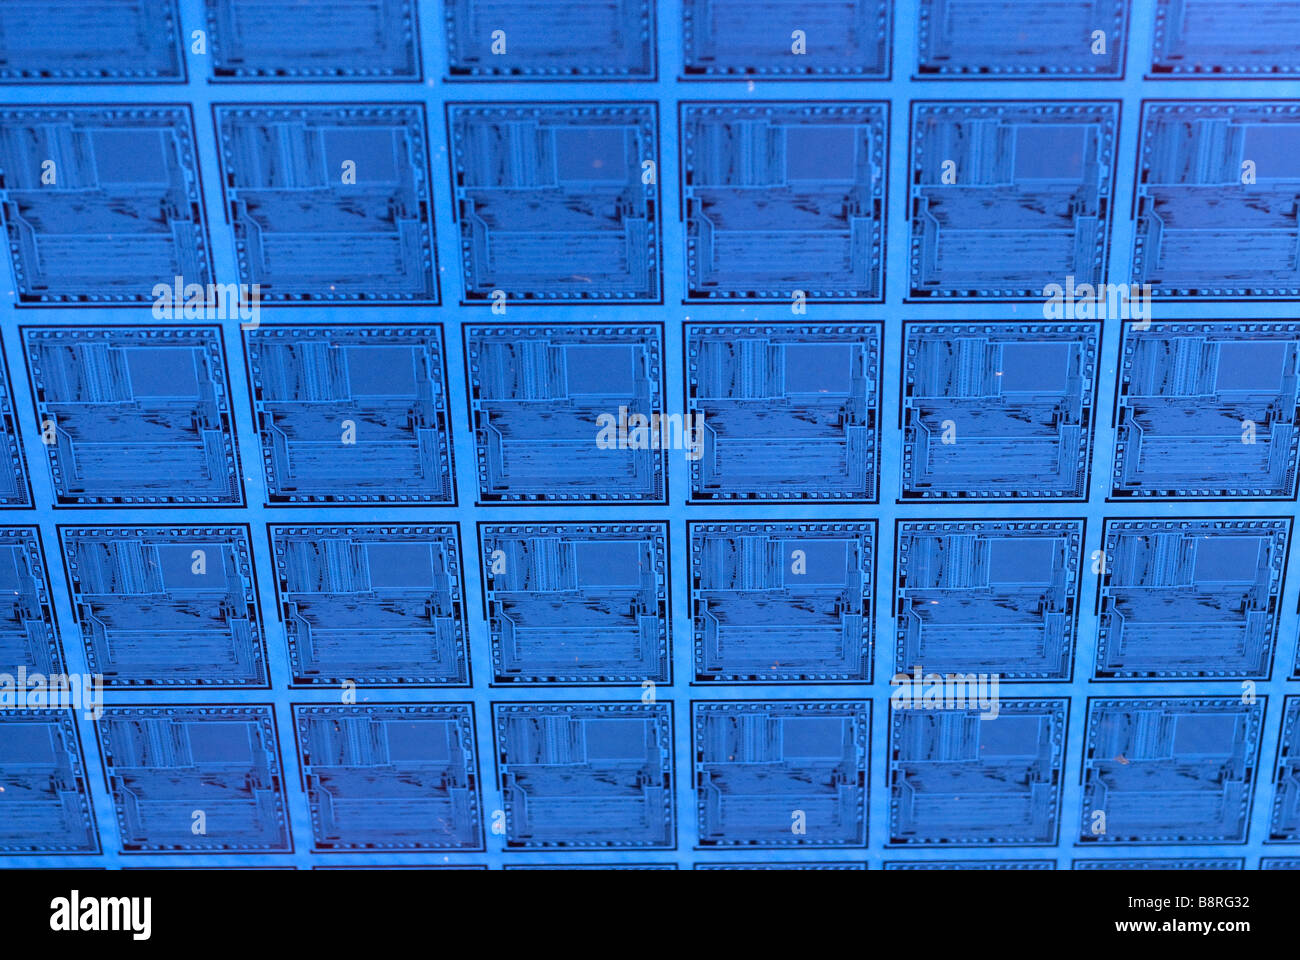 Pattern of microchip circuits on silicon semiconductor computer wafer. Stock Photo